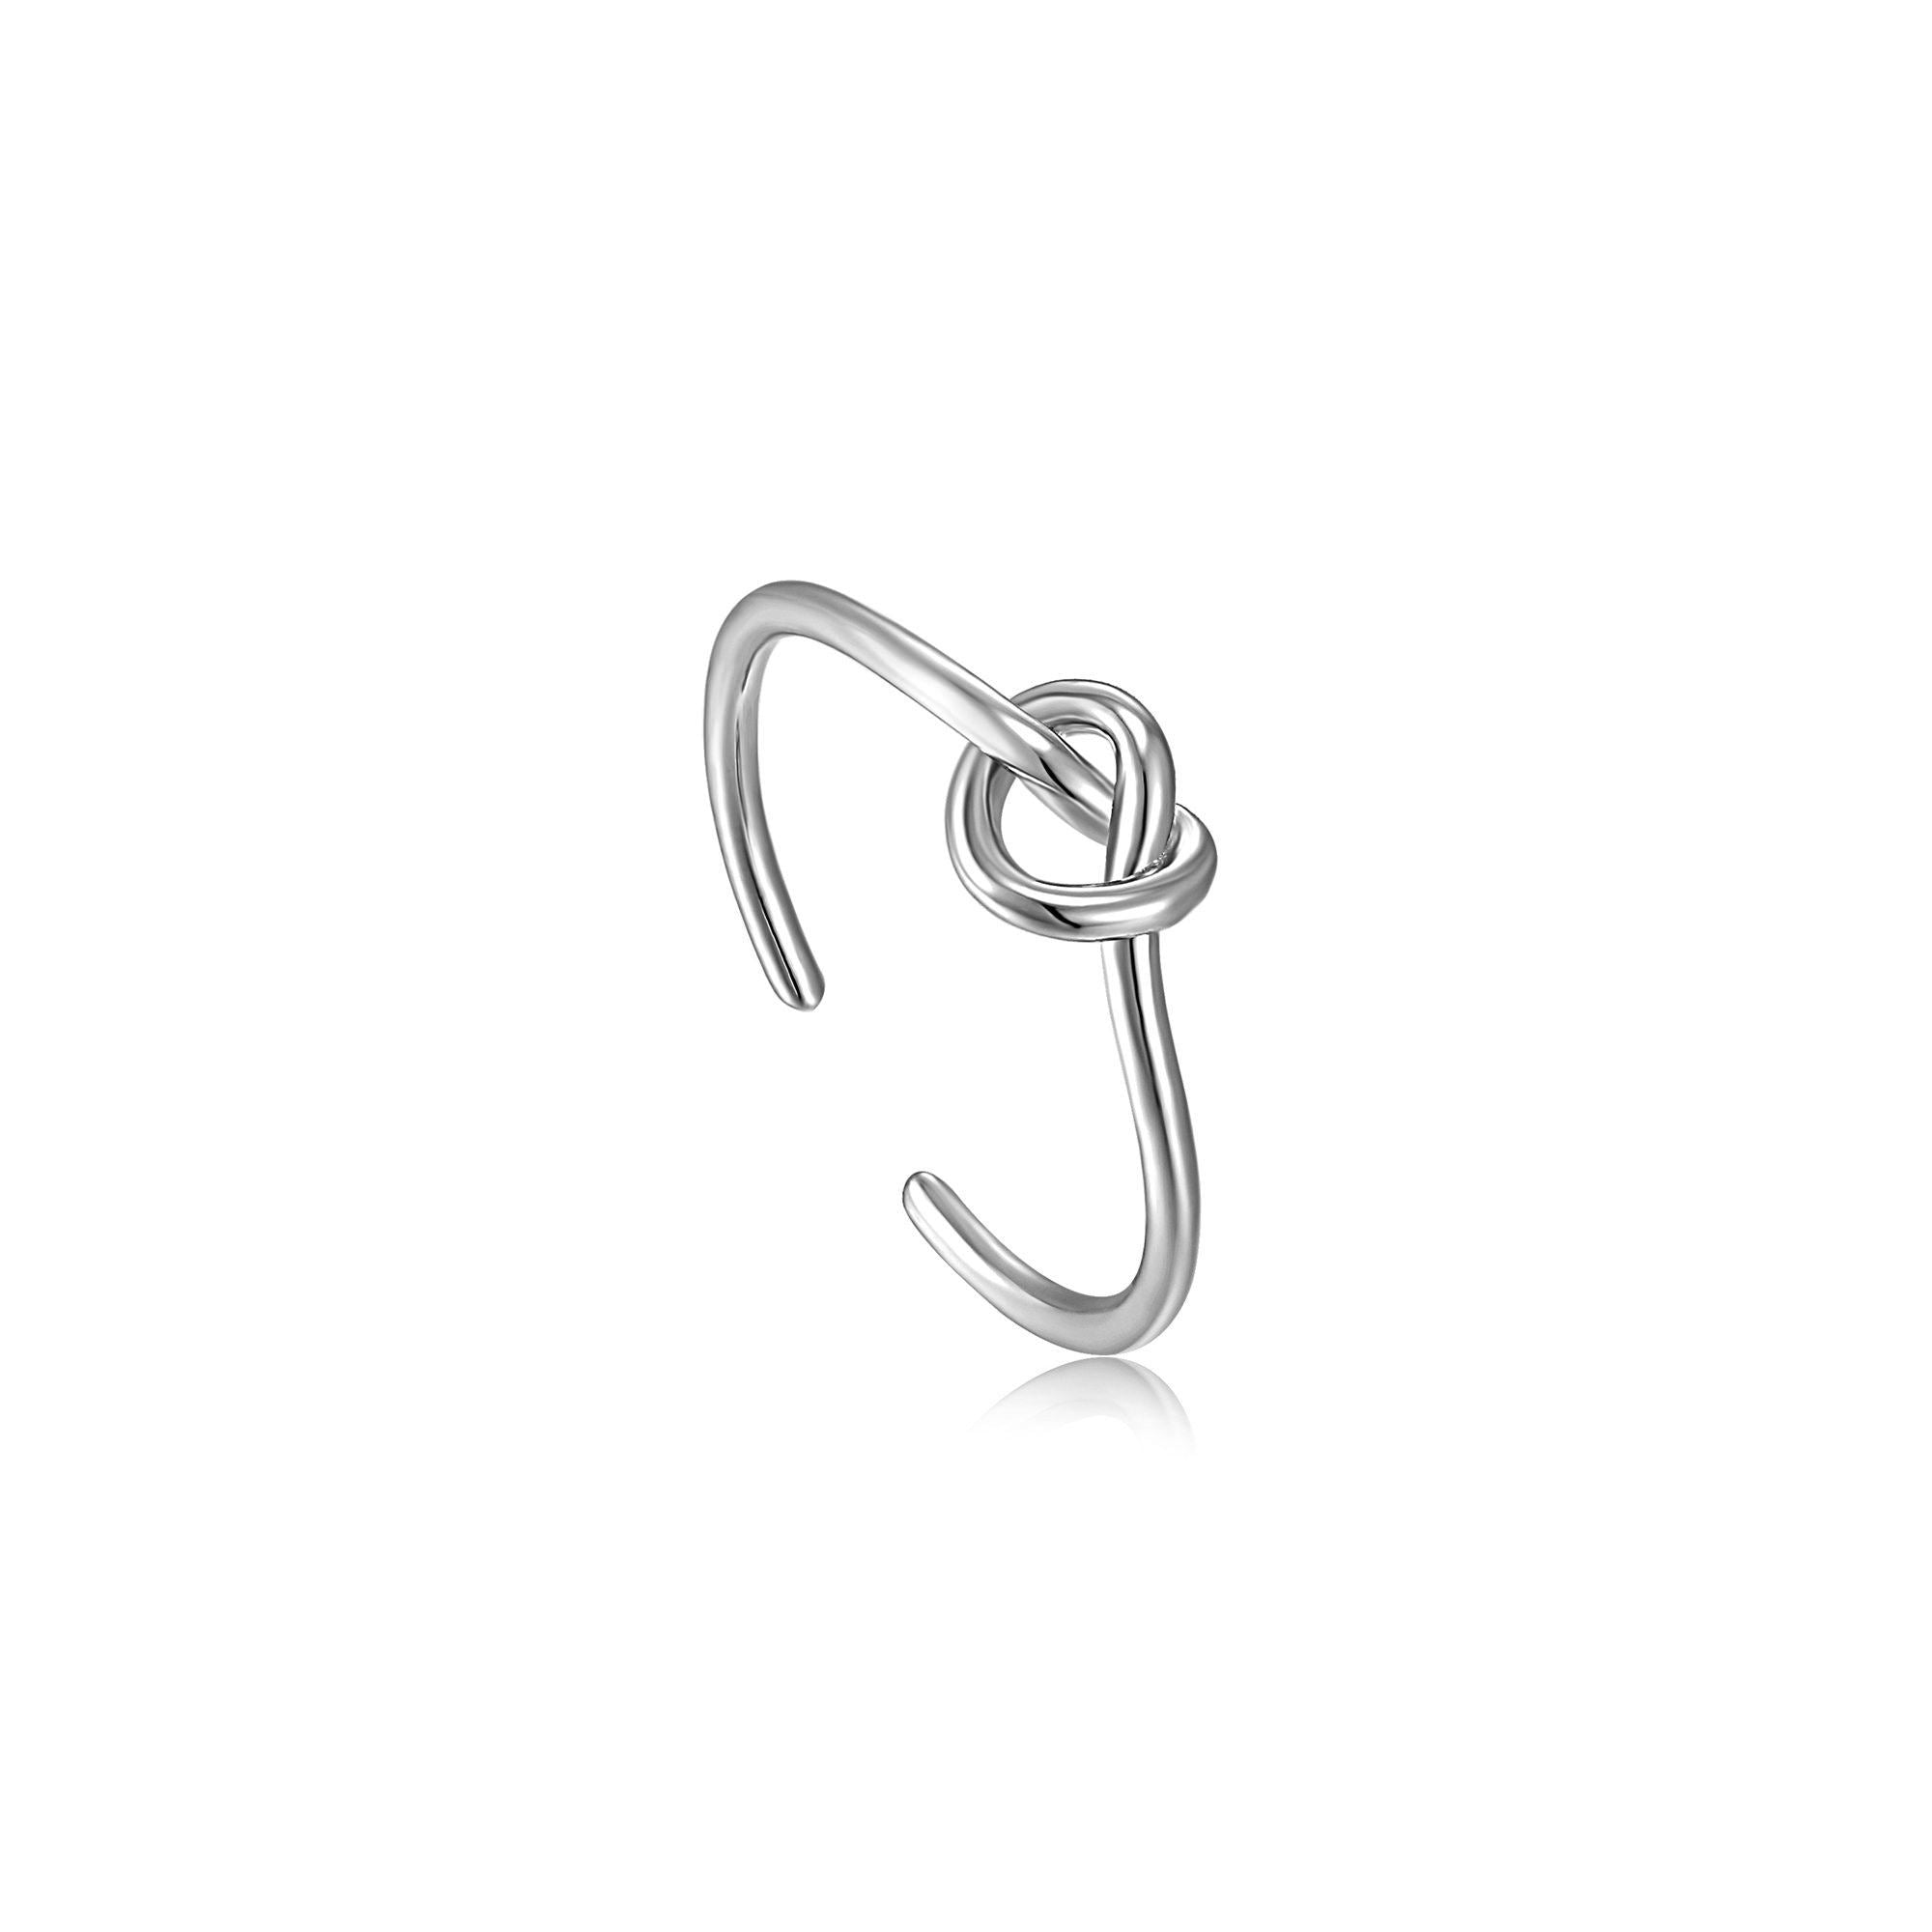 Ania Haie Silver Knot Adjustable Ring